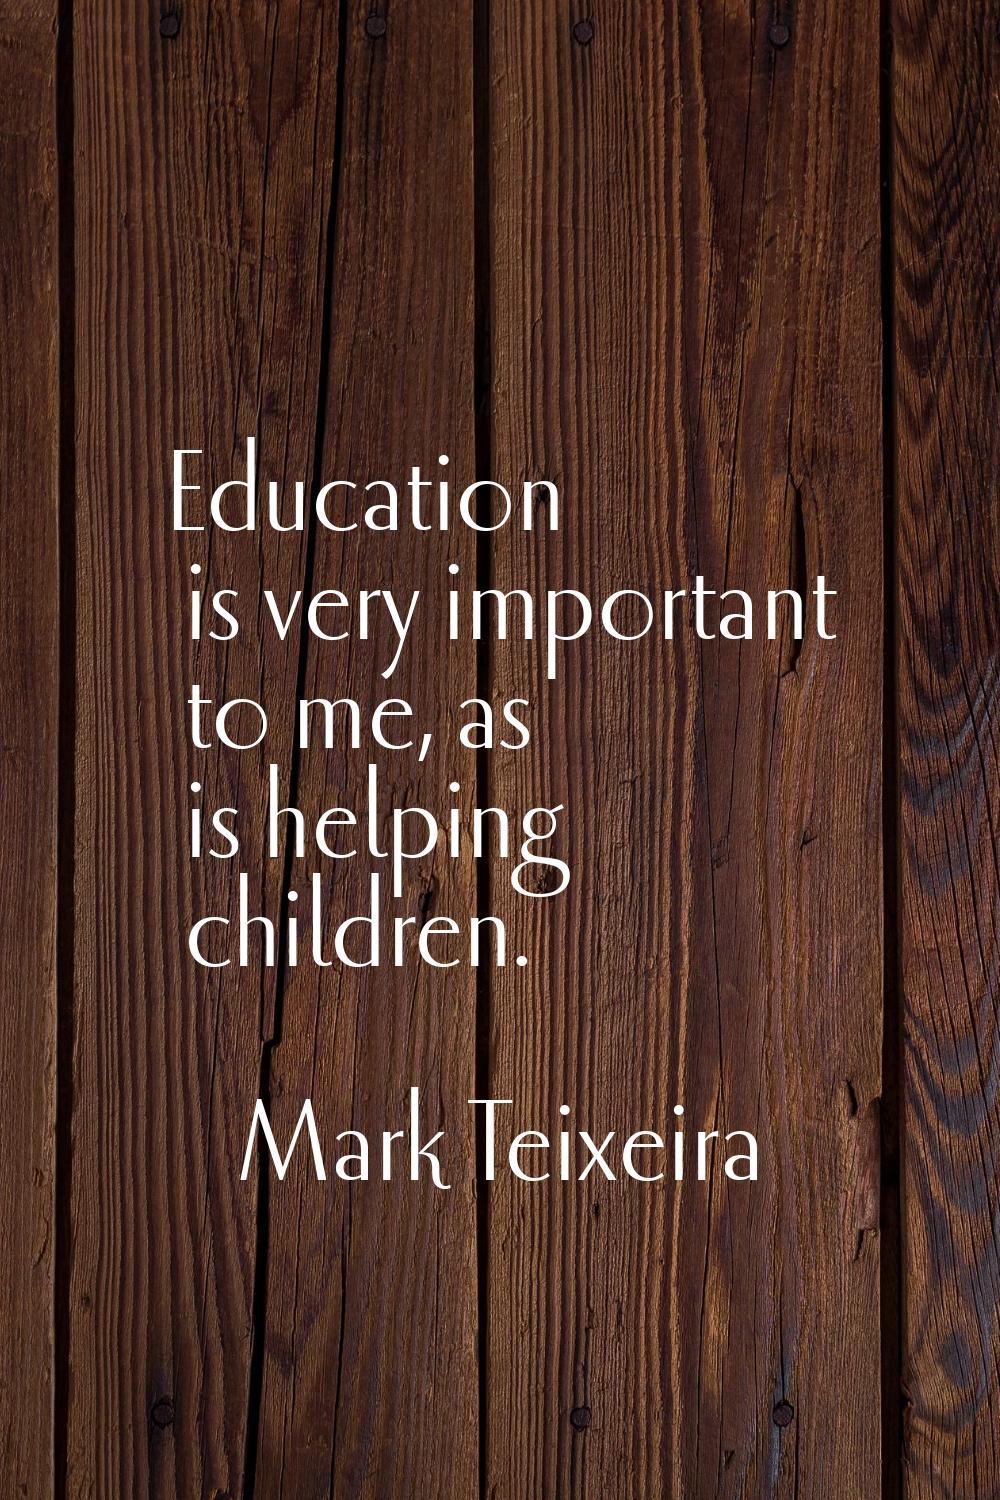 Education is very important to me, as is helping children.